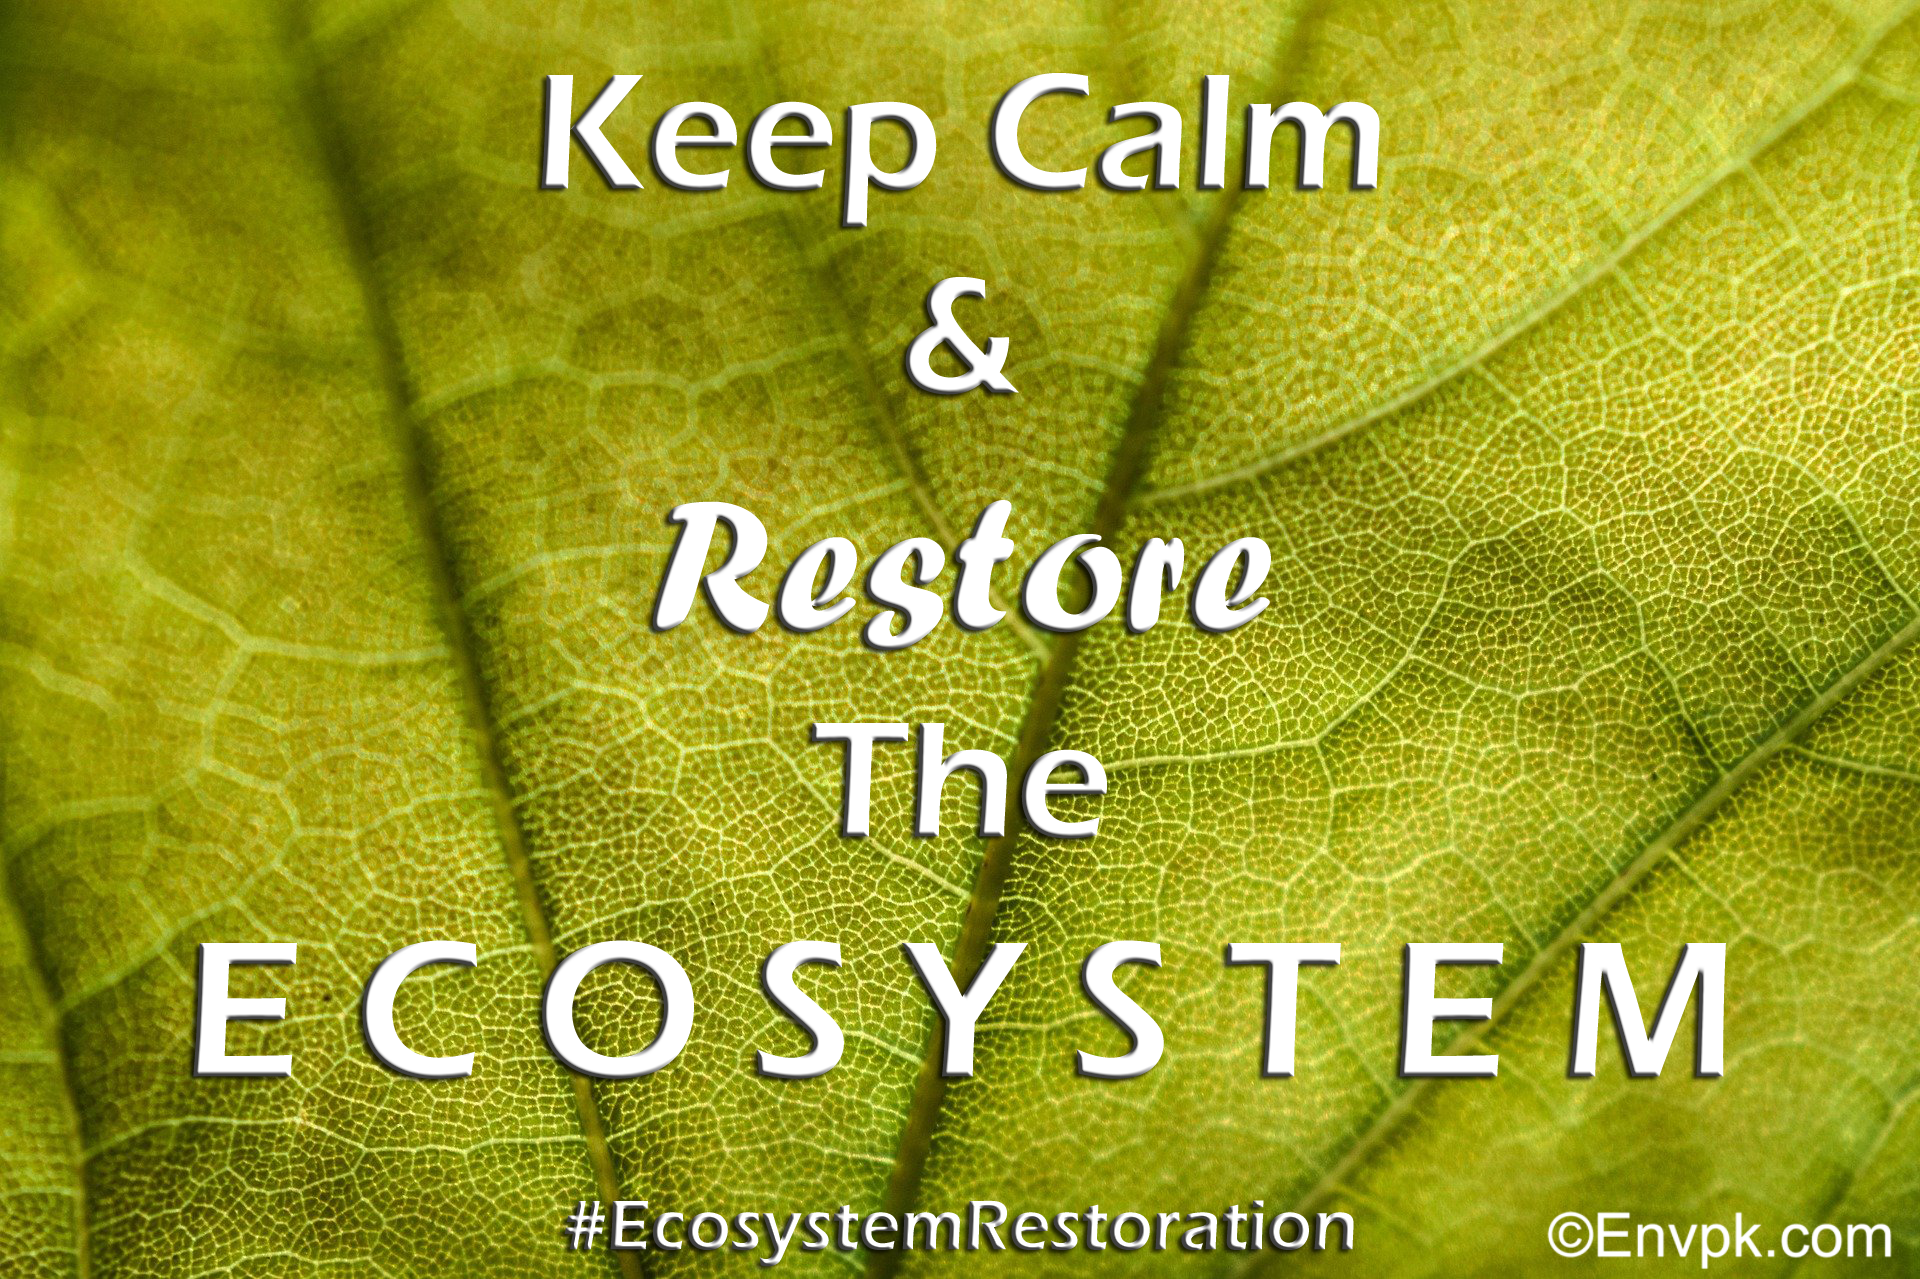 20 Environmental and Ecosystem Restoration Slogans Pictures